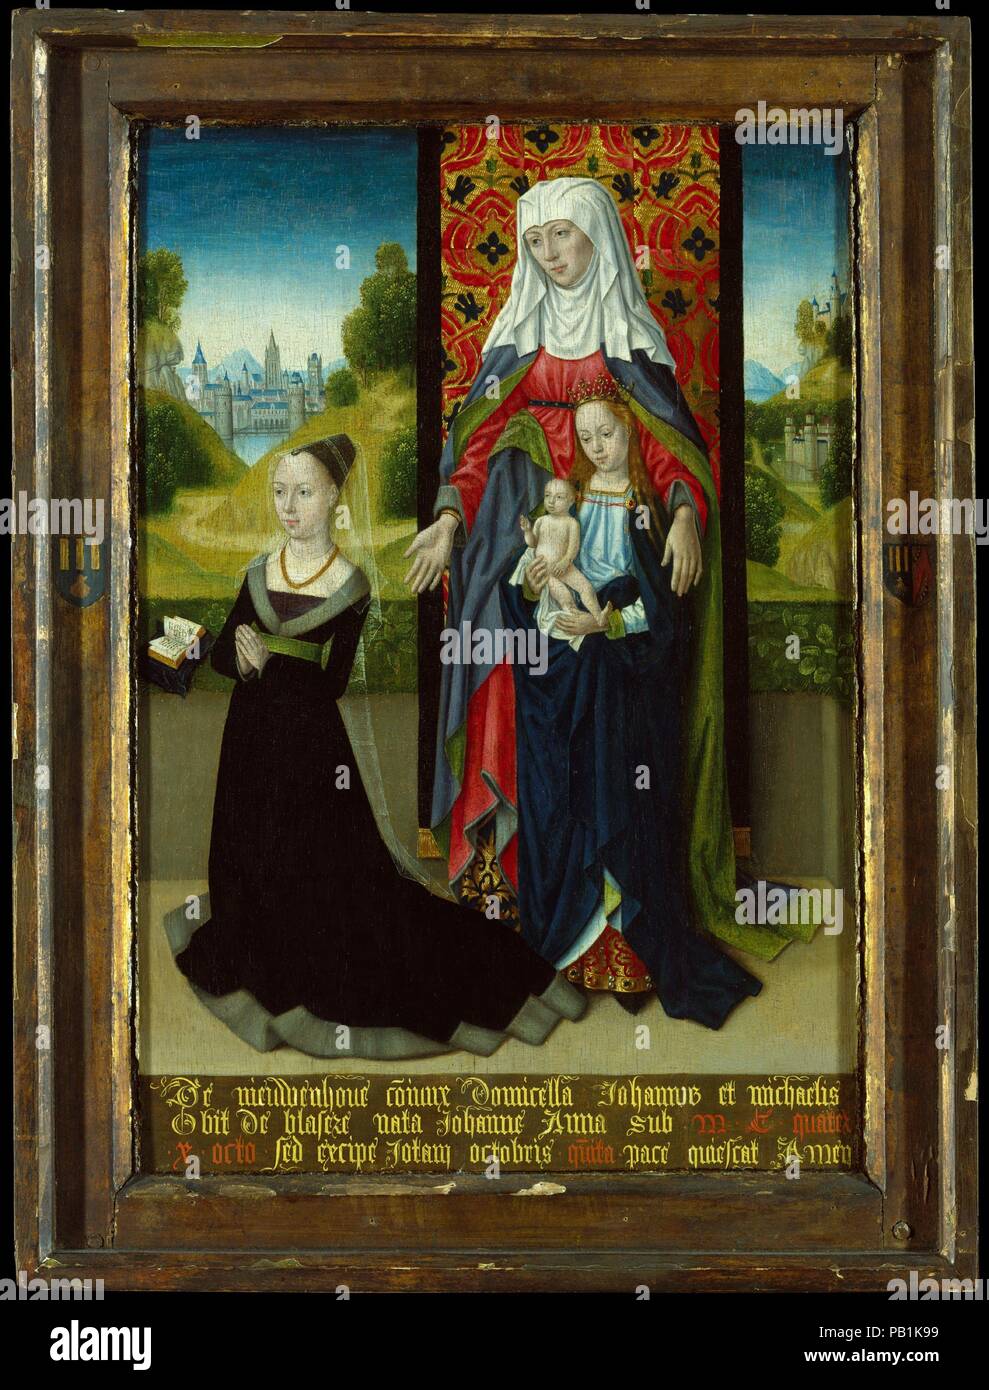 Virgin and Child with Saint Anne Presenting Anna van Nieuwenhove. Artist: Master of the Saint Ursula Legend (Netherlandish, active late 15th century). Culture: Netherlandish. Dimensions: Overall, with engaged frame 23 5/8 x 17 3/4 in. (59.9 x 45 cm); painted surface 19 5/8 x 13 1/2 in. (49.8 x 34.3 cm). Date: 1479-82. Museum: Metropolitan Museum of Art, New York, USA. Stock Photo